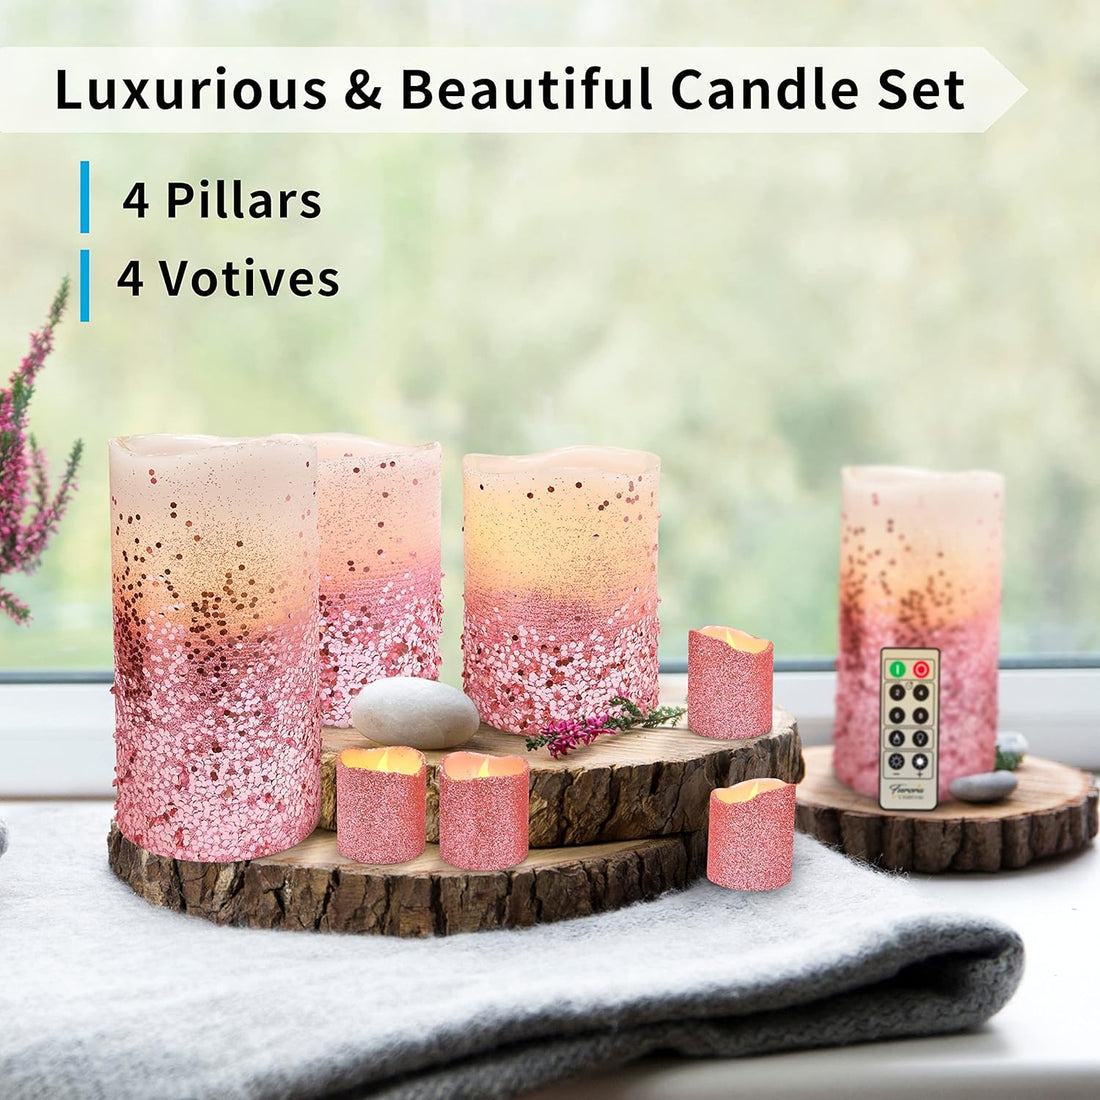 FURORA LIGHTING LED Flameless Candles with Remote – Battery-Operated Flameless Candles Bulk Set of 8 Fake Candles – Small Flameless Candles & Christmas Centerpieces for Tables, Rose Gold Glittery